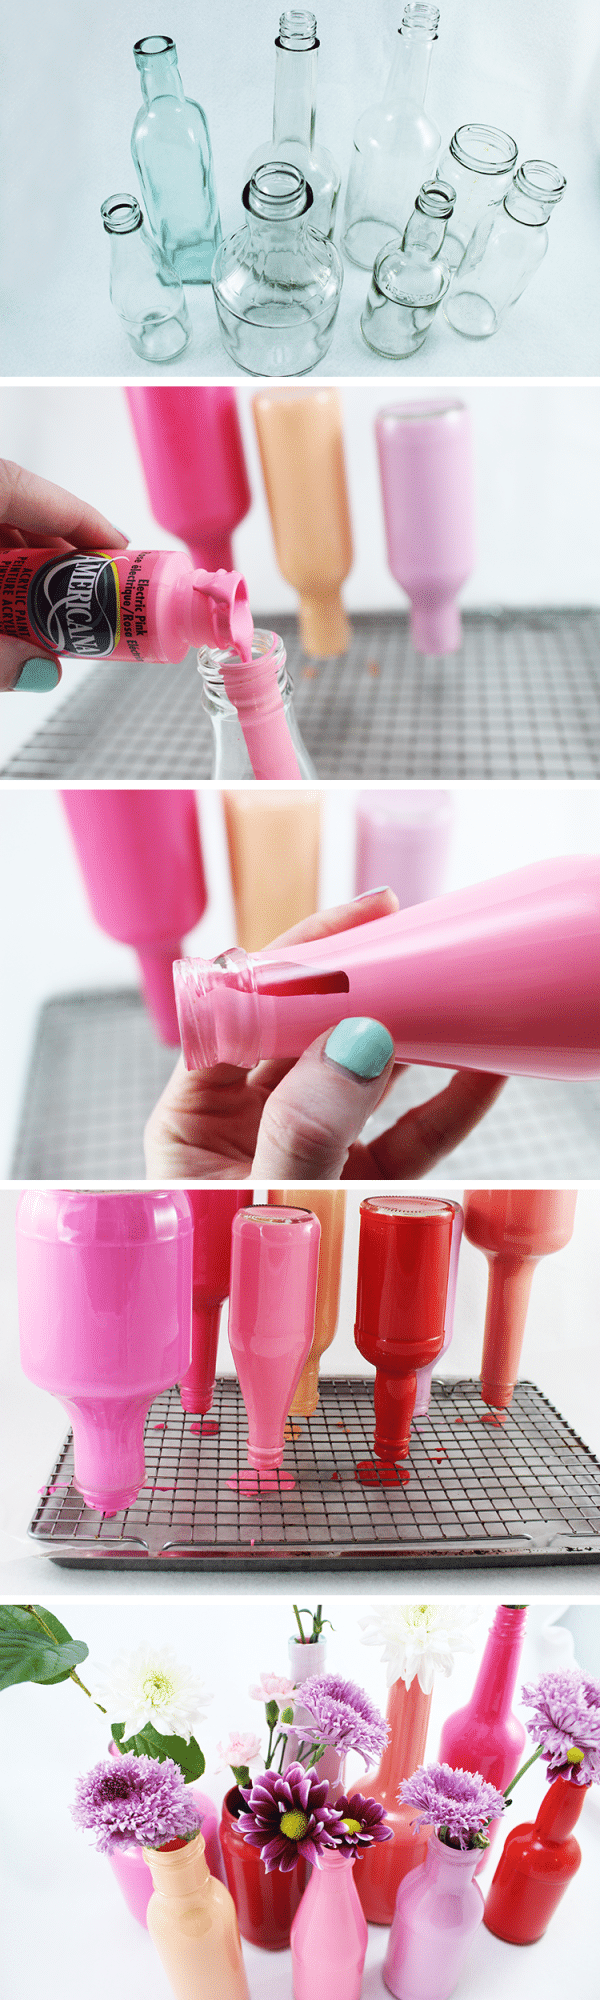 idees-recyclage-bouteille-verre-14